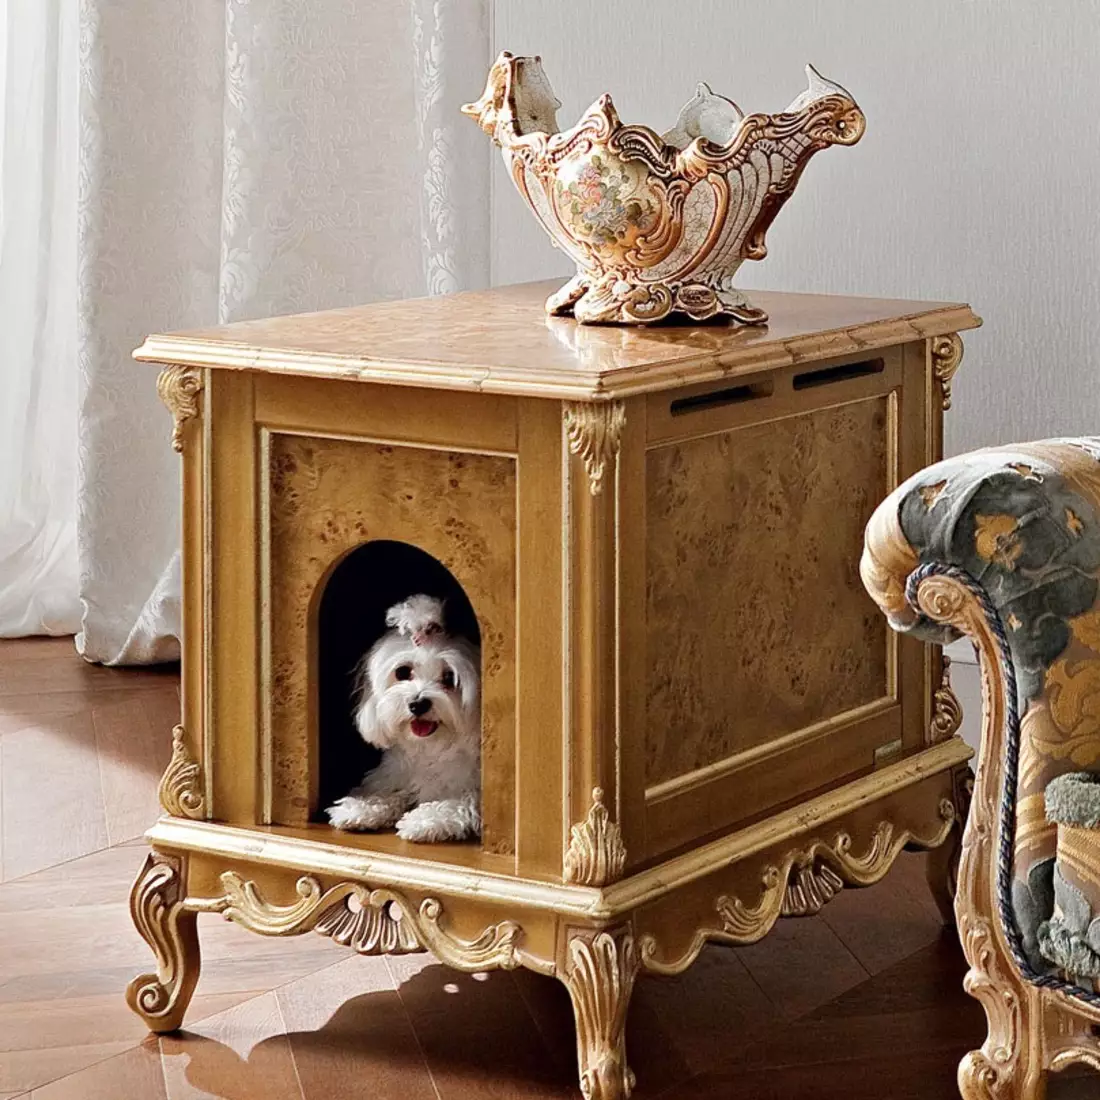 Doghouse-in-briar-root-hardwood-pet-living-Casanova-collection-Modenese-Gastone